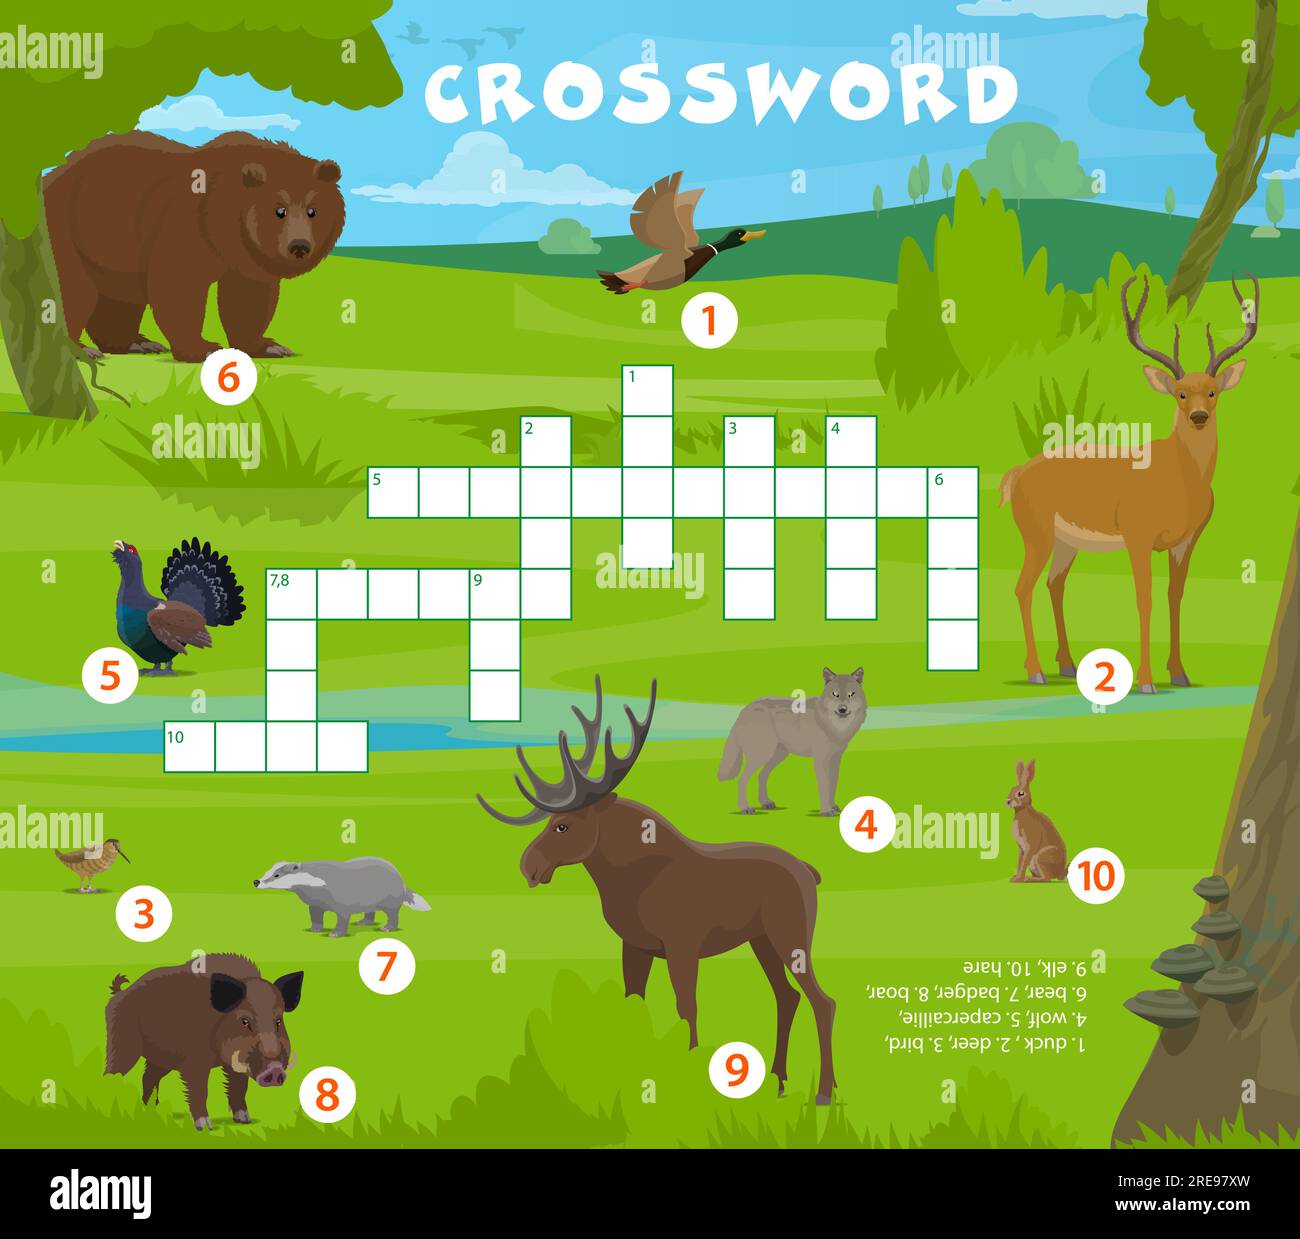 Crossword quiz game. Forest hunting animals and birds. Crossword quiz, word search riddle vector worksheet or vocabulary playing activity with bear, duck, capercaillie, deer and wolf, hare animals Stock Vector